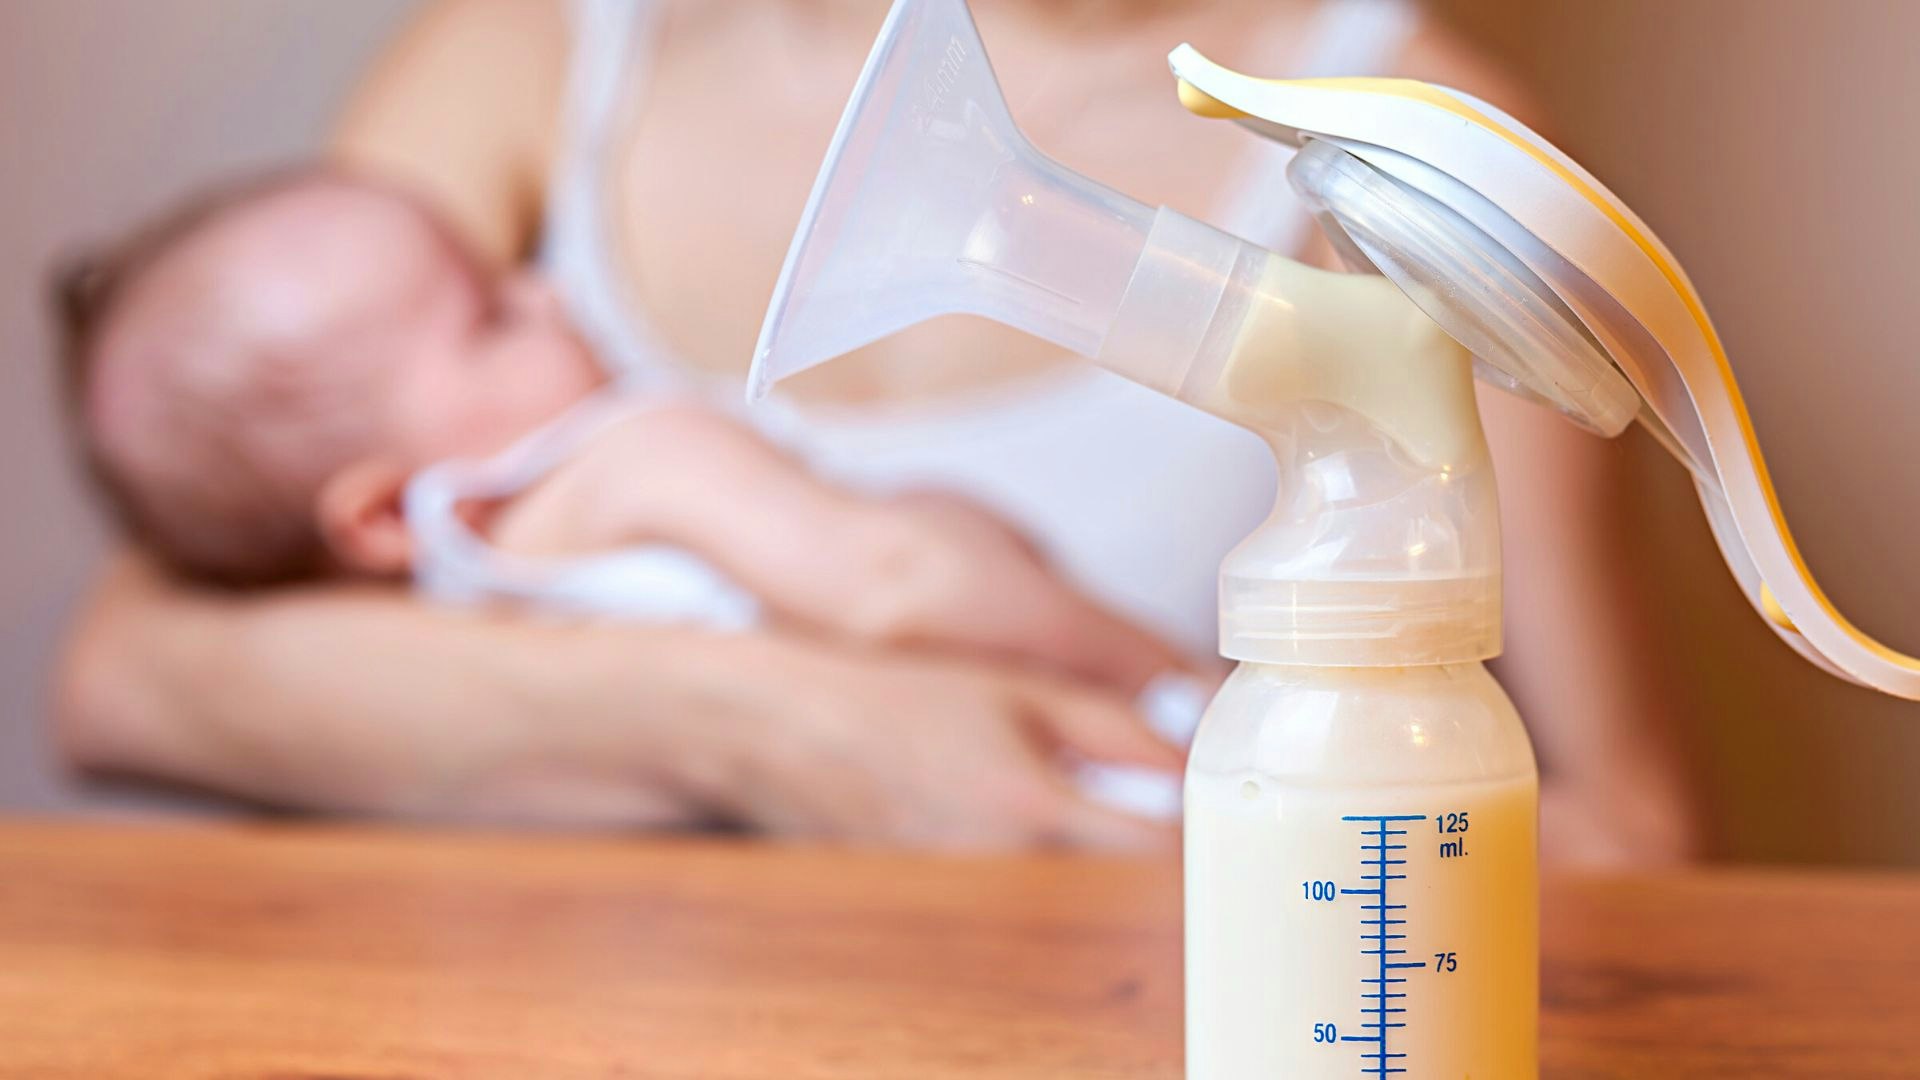 How to Choose the Best Breast Pump for Your Needs – Lilu